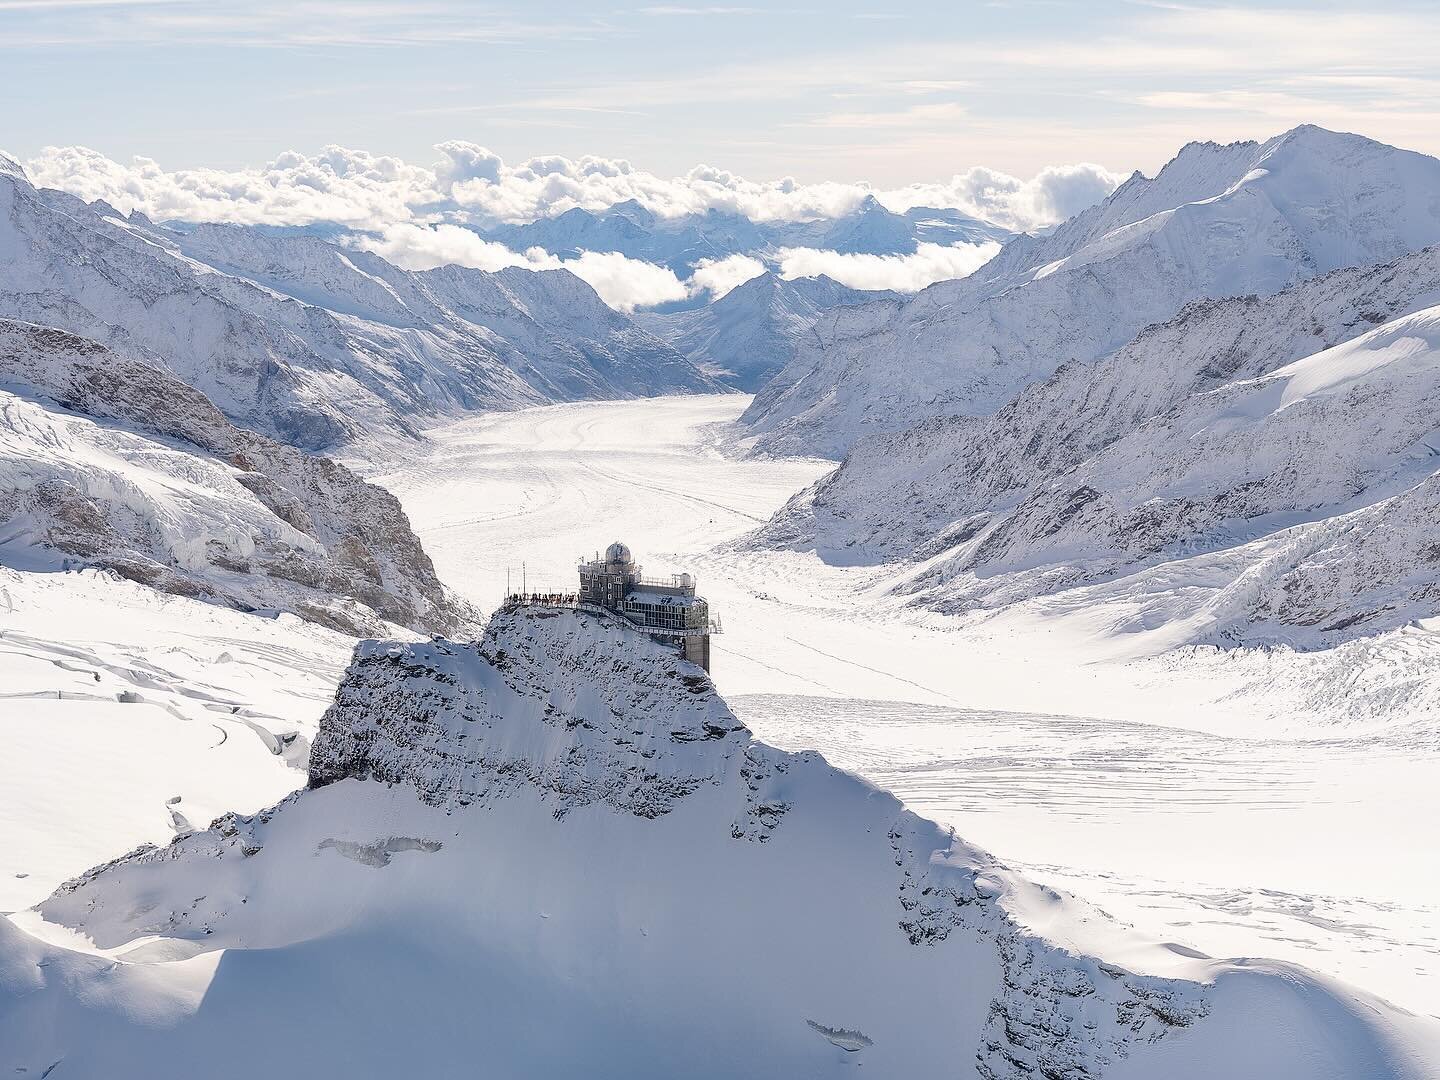 Jungfraujoch- Top of Europe

The Swiss have truly conquered the mountains, and if you had any doubts, this place will change your mind. 

This is an observatory sitting 11,000ft above sea level with the back drop of the Aletsch glacier. The craziest 